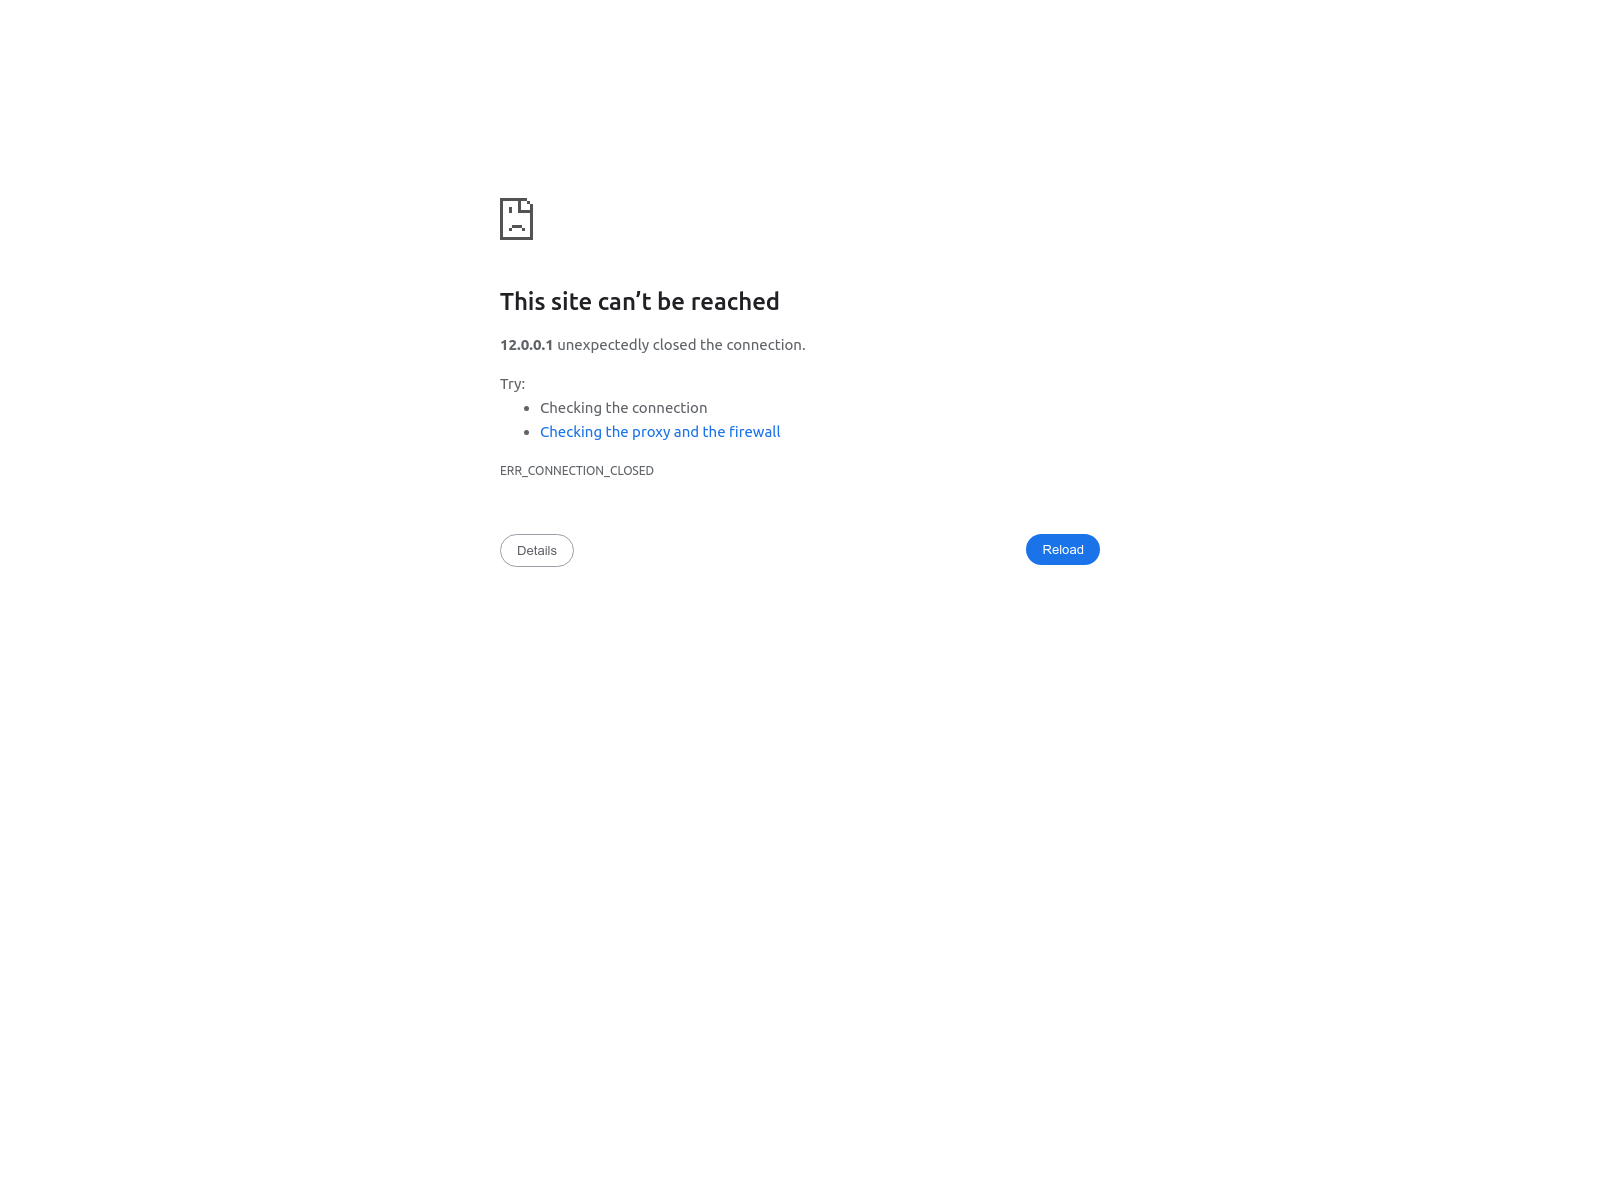 screenshot not available (yet)